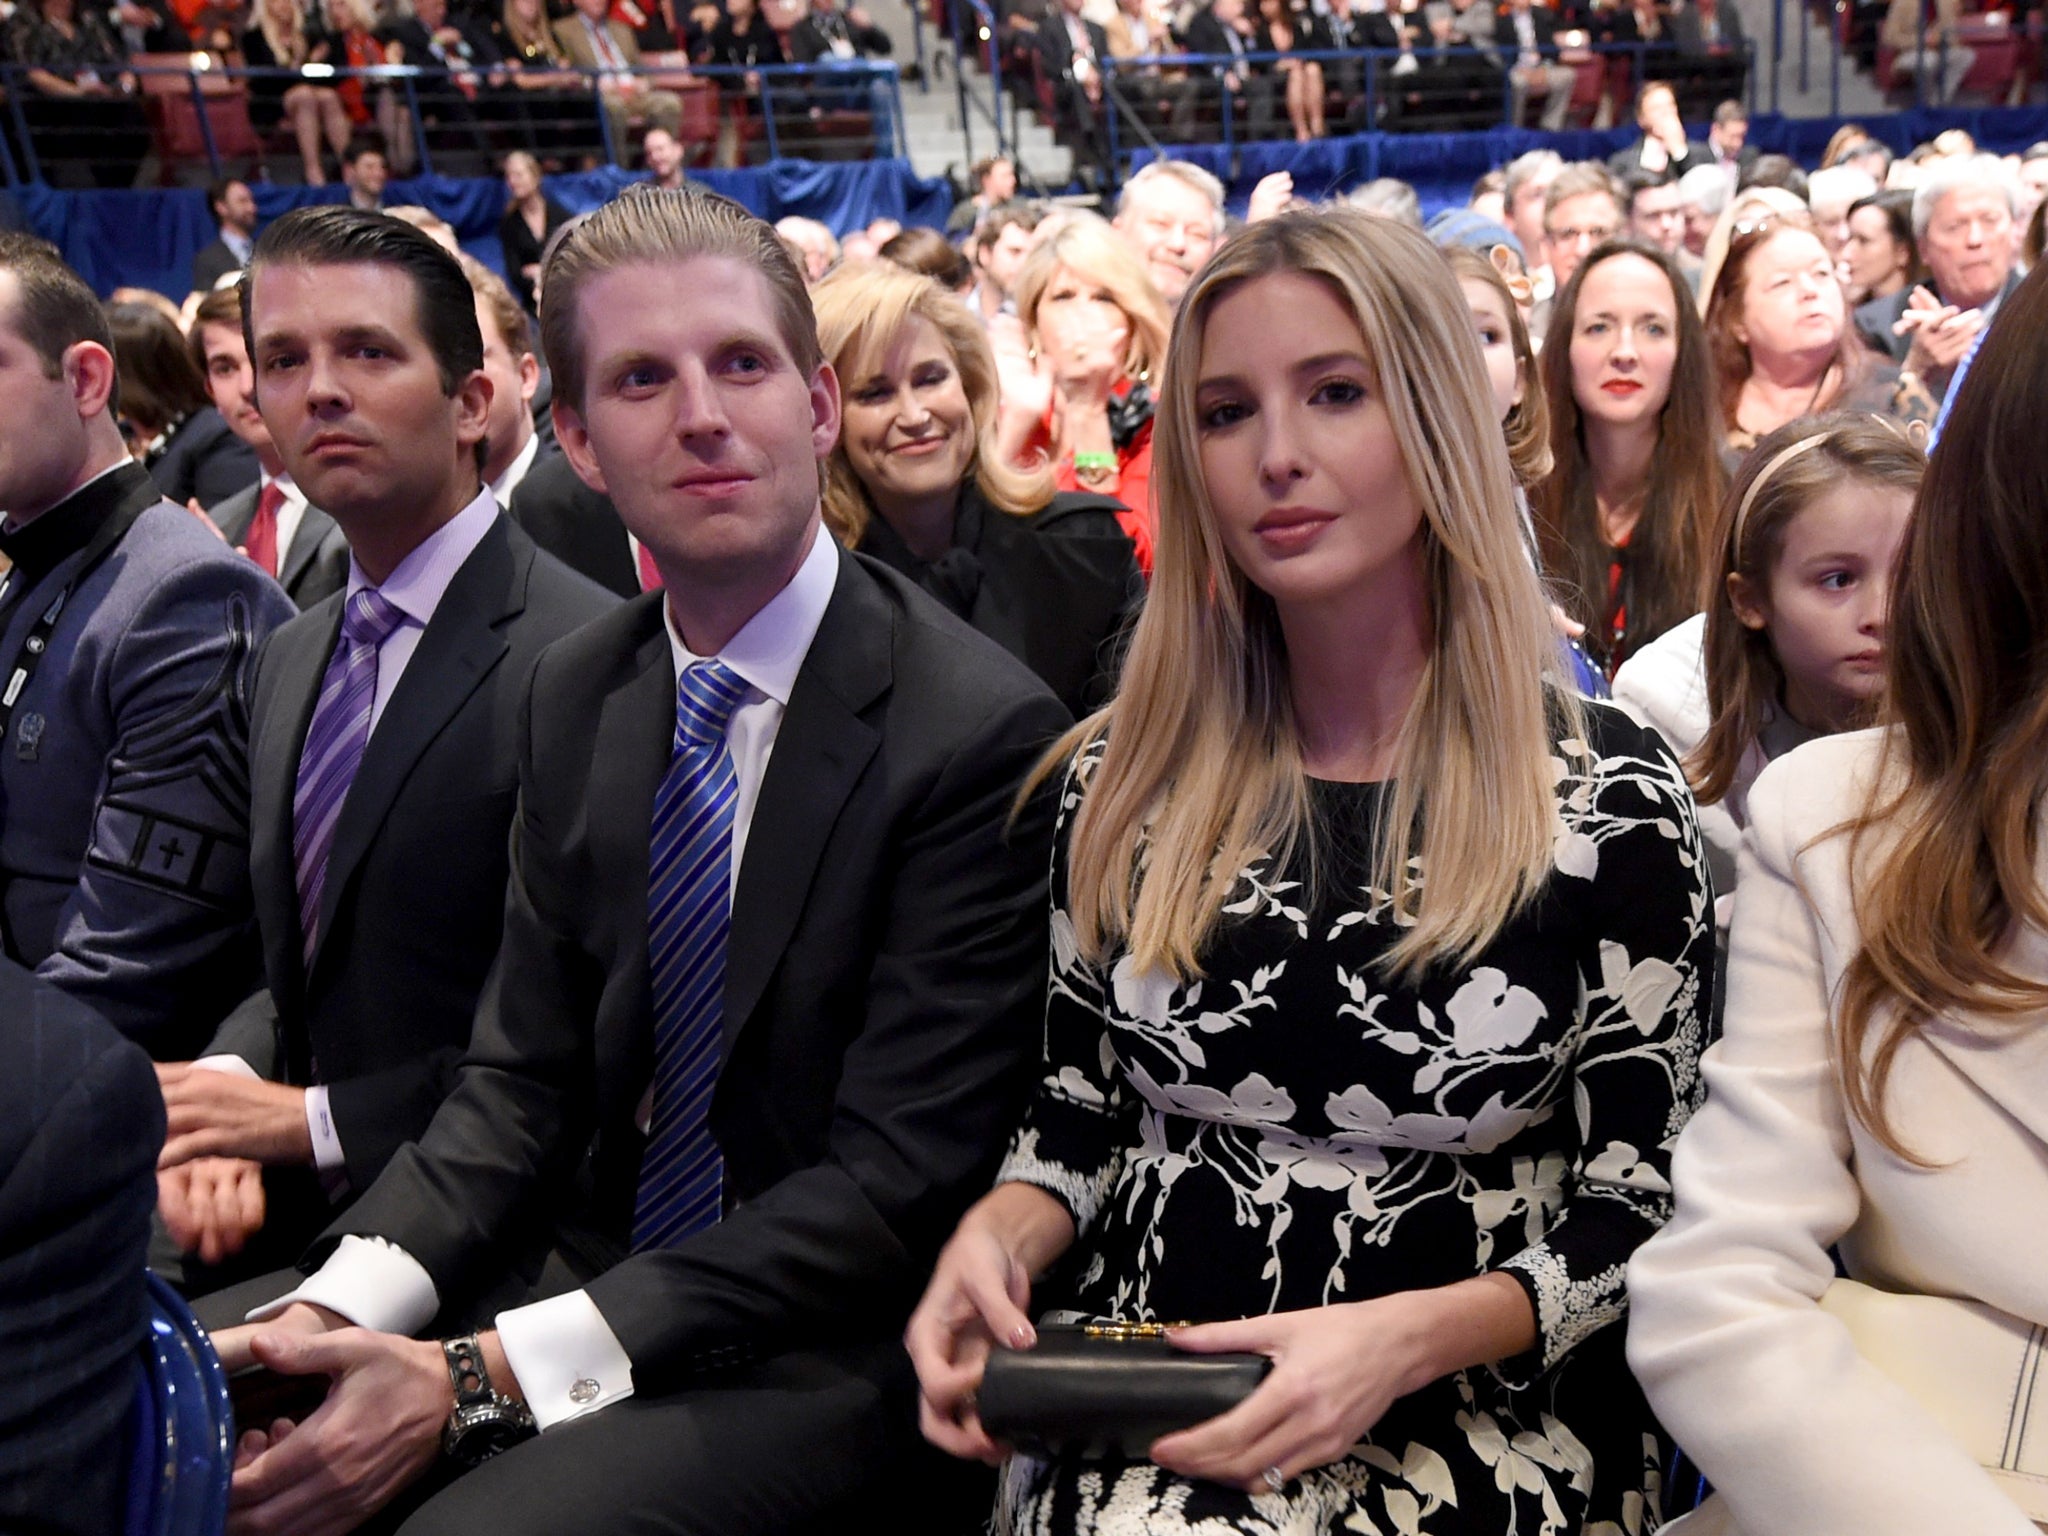 Ivanka Trump and Eric Trump attending a GOP presidential debate Timothy A Clary/Getty